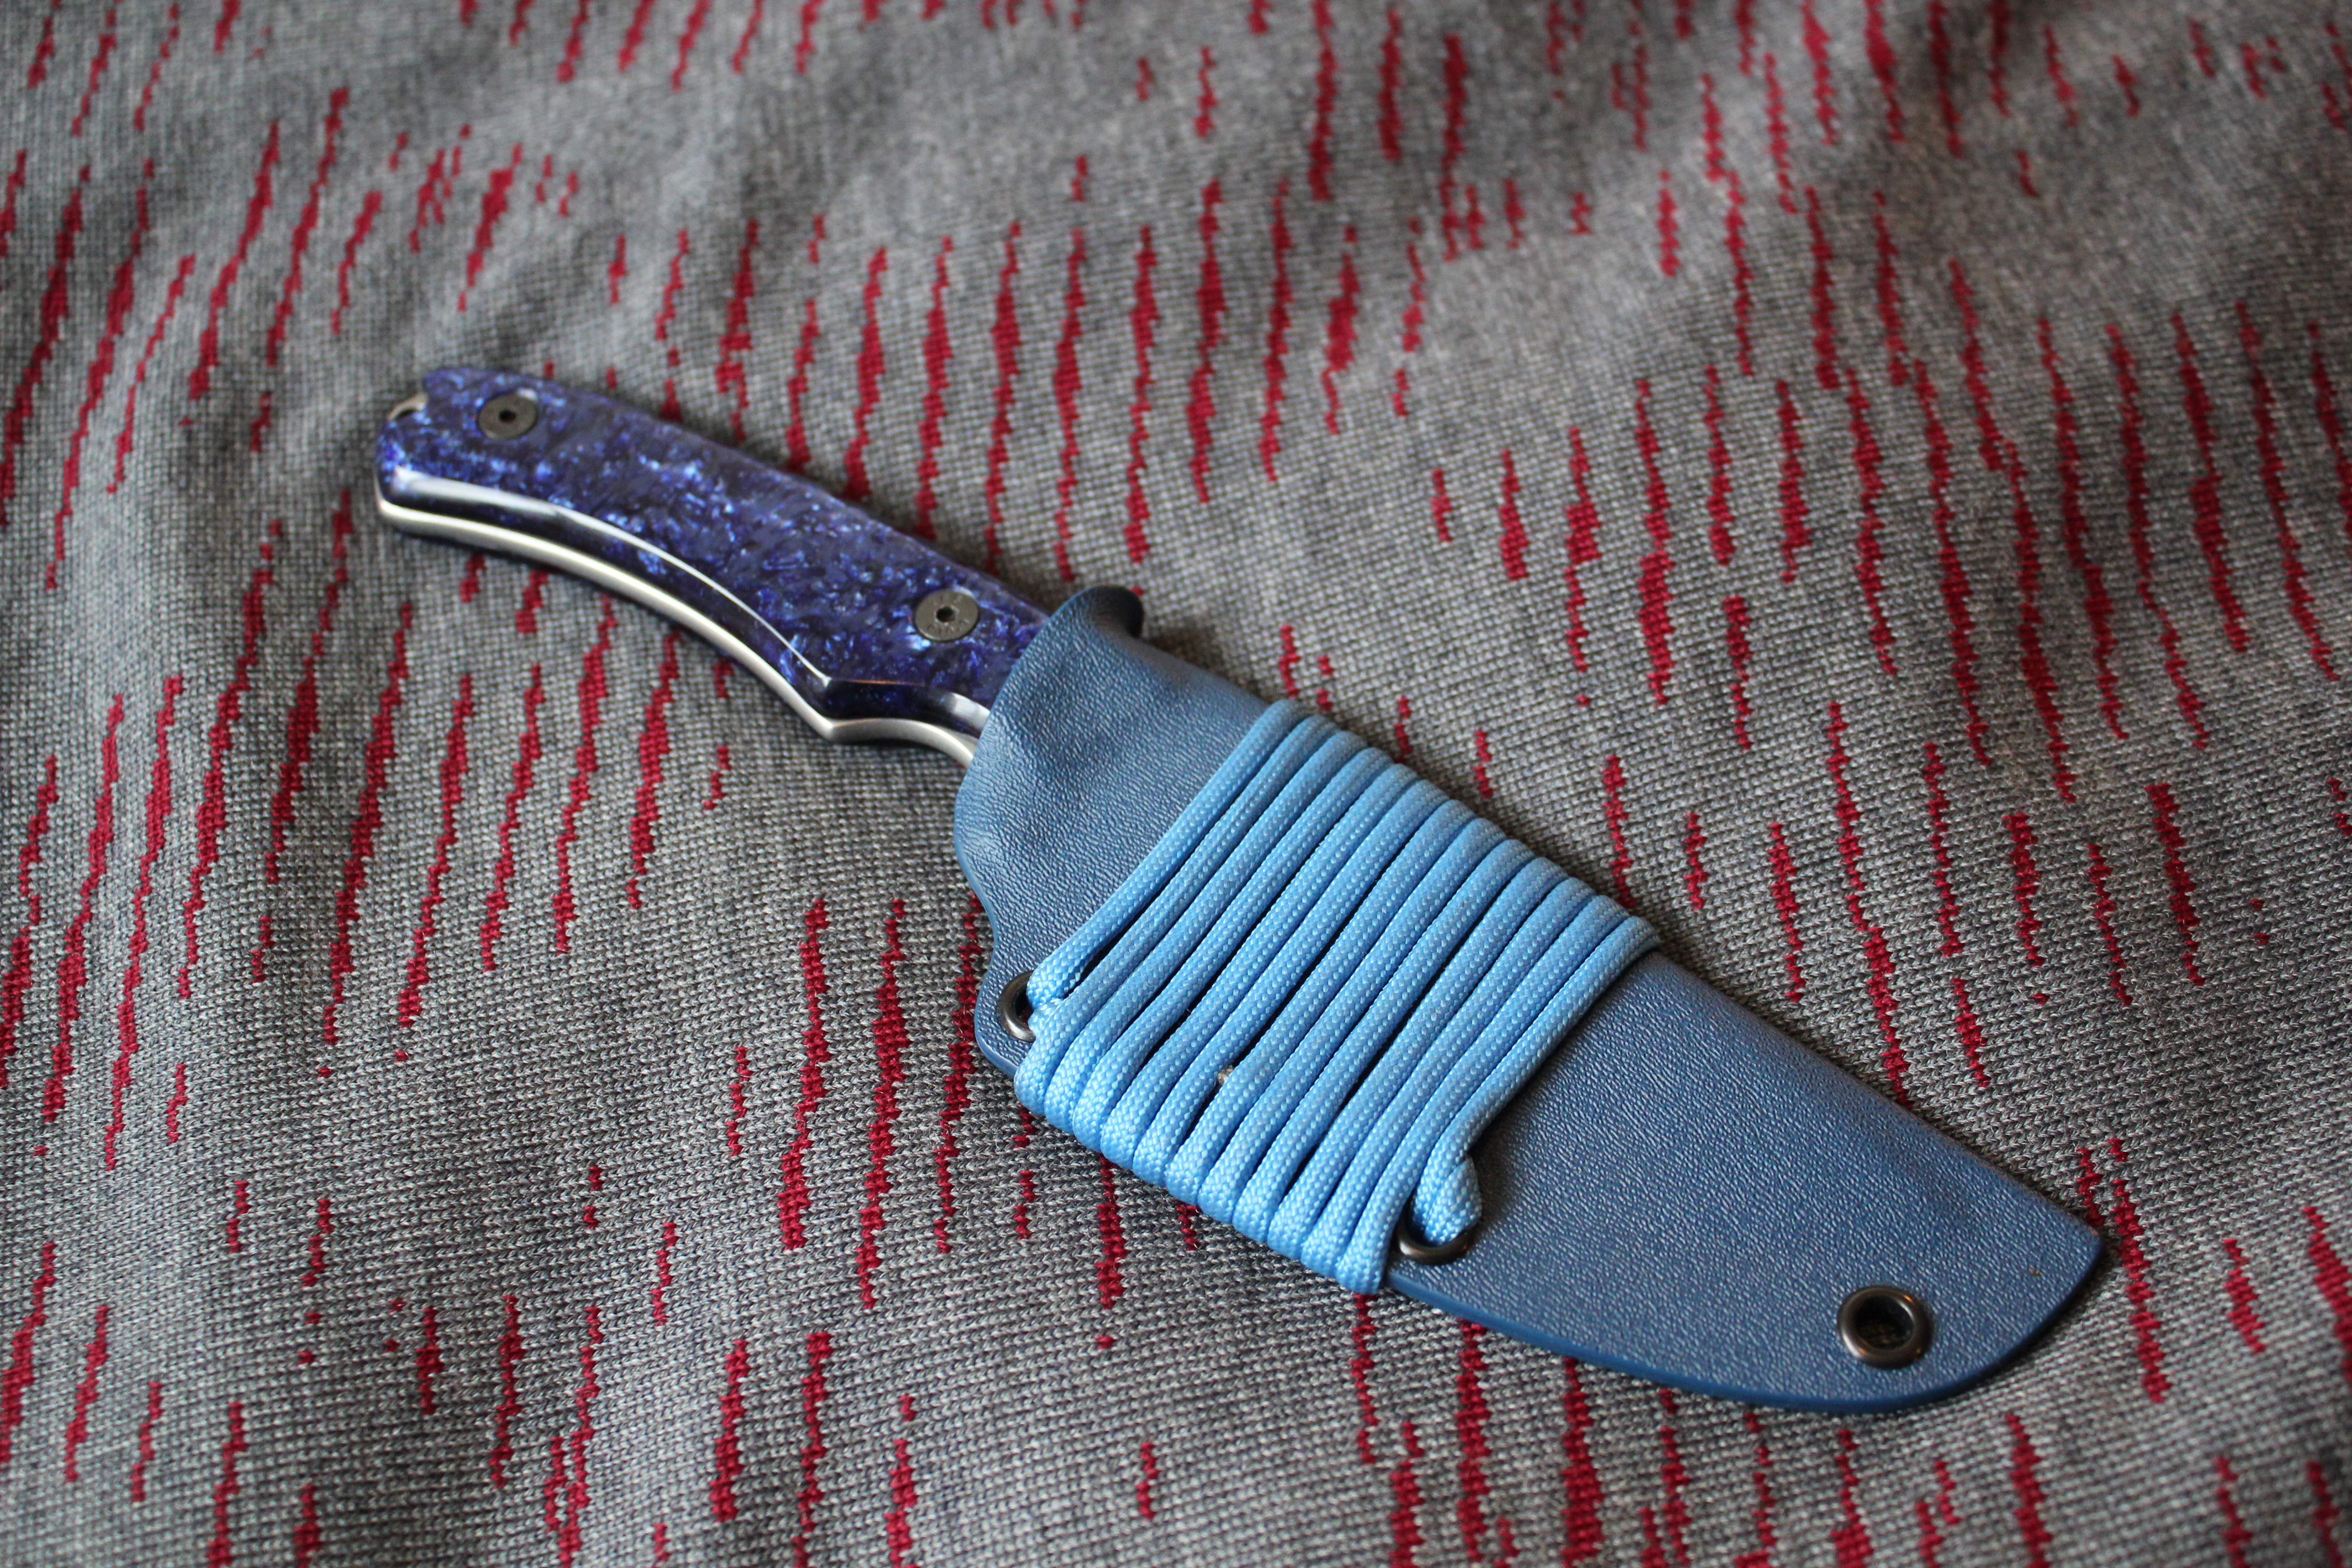 a photo of a completed knife in sheath